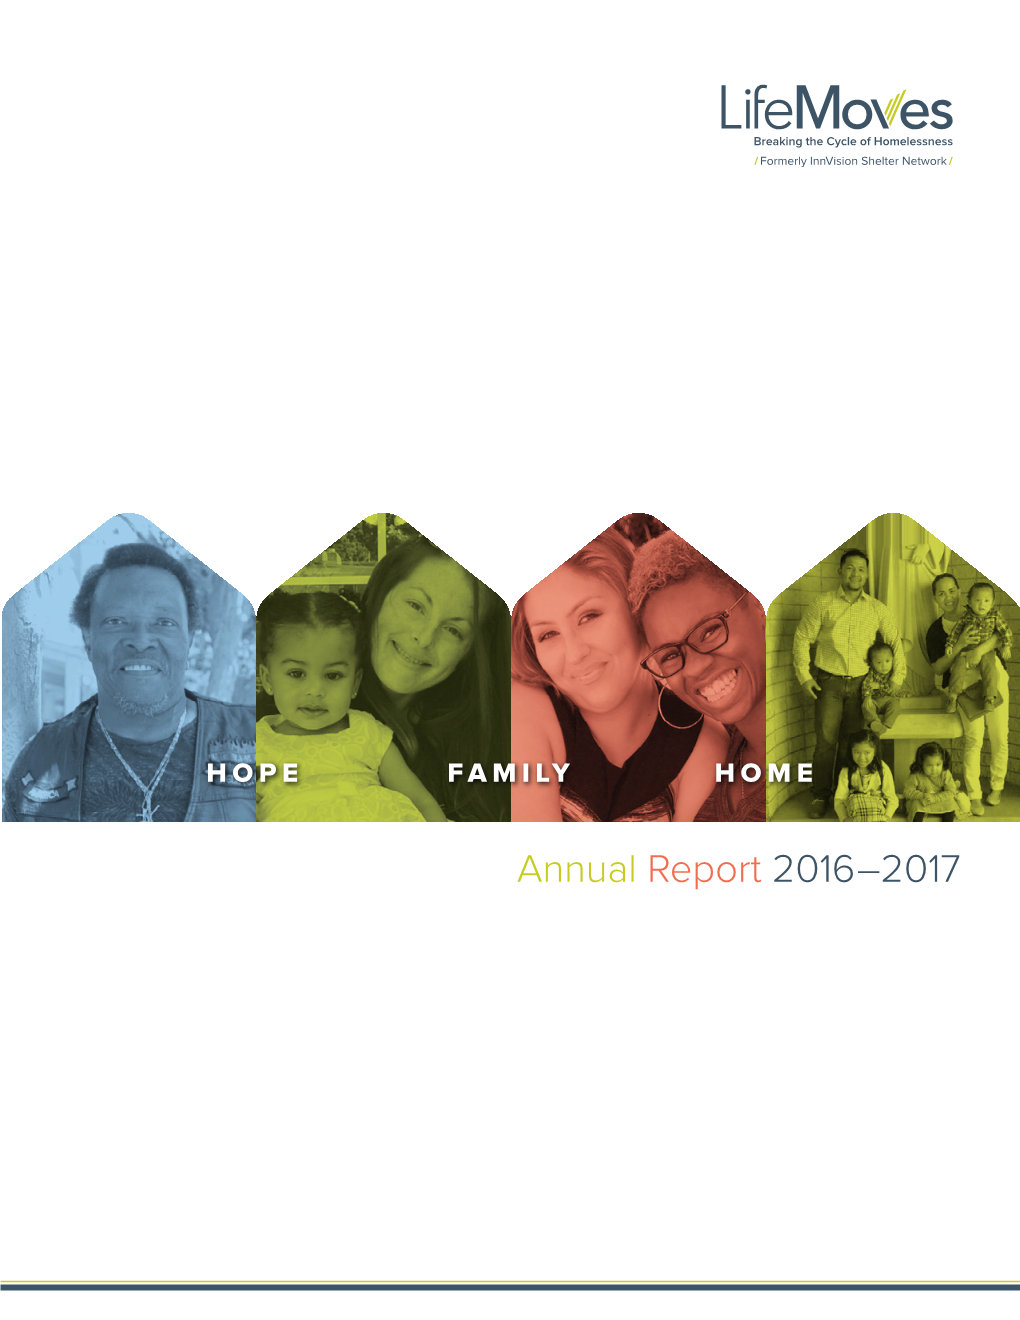 Annual Report 2016–2017 from Our CEO